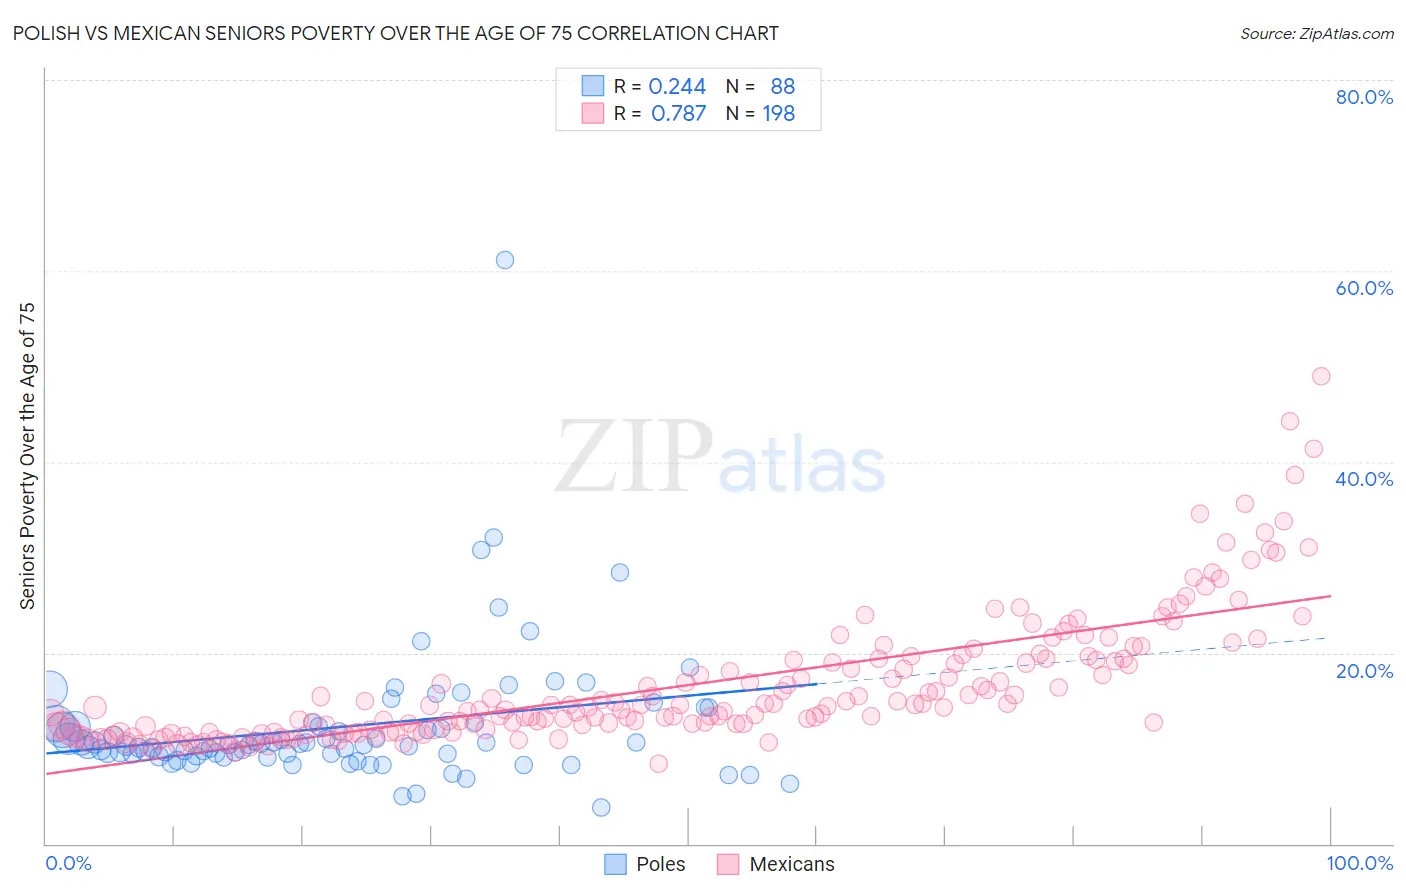 Polish vs Mexican Seniors Poverty Over the Age of 75